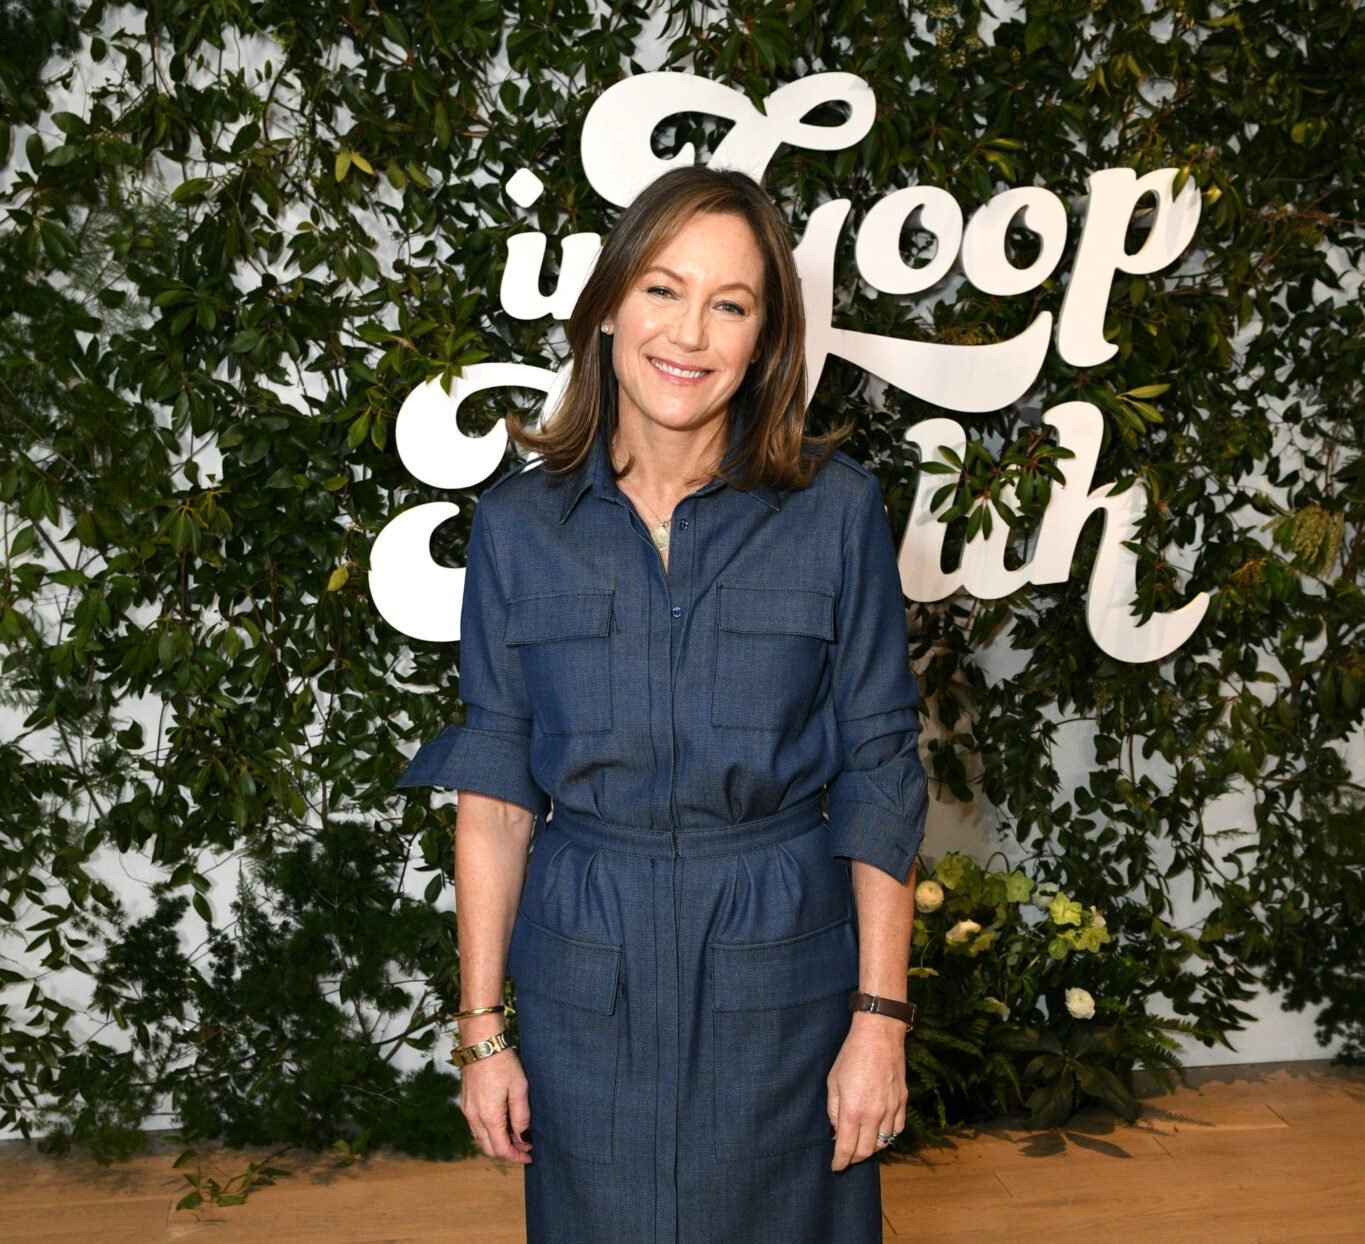 NEW YORK, NEW YORK - MARCH 09: Gregg Renfrew attends the In goop Health Summit New York 2019 at Seaport District NYC on March 09, 2019 in New York City. (Photo by Bryan Bedder/Getty Images for goop)